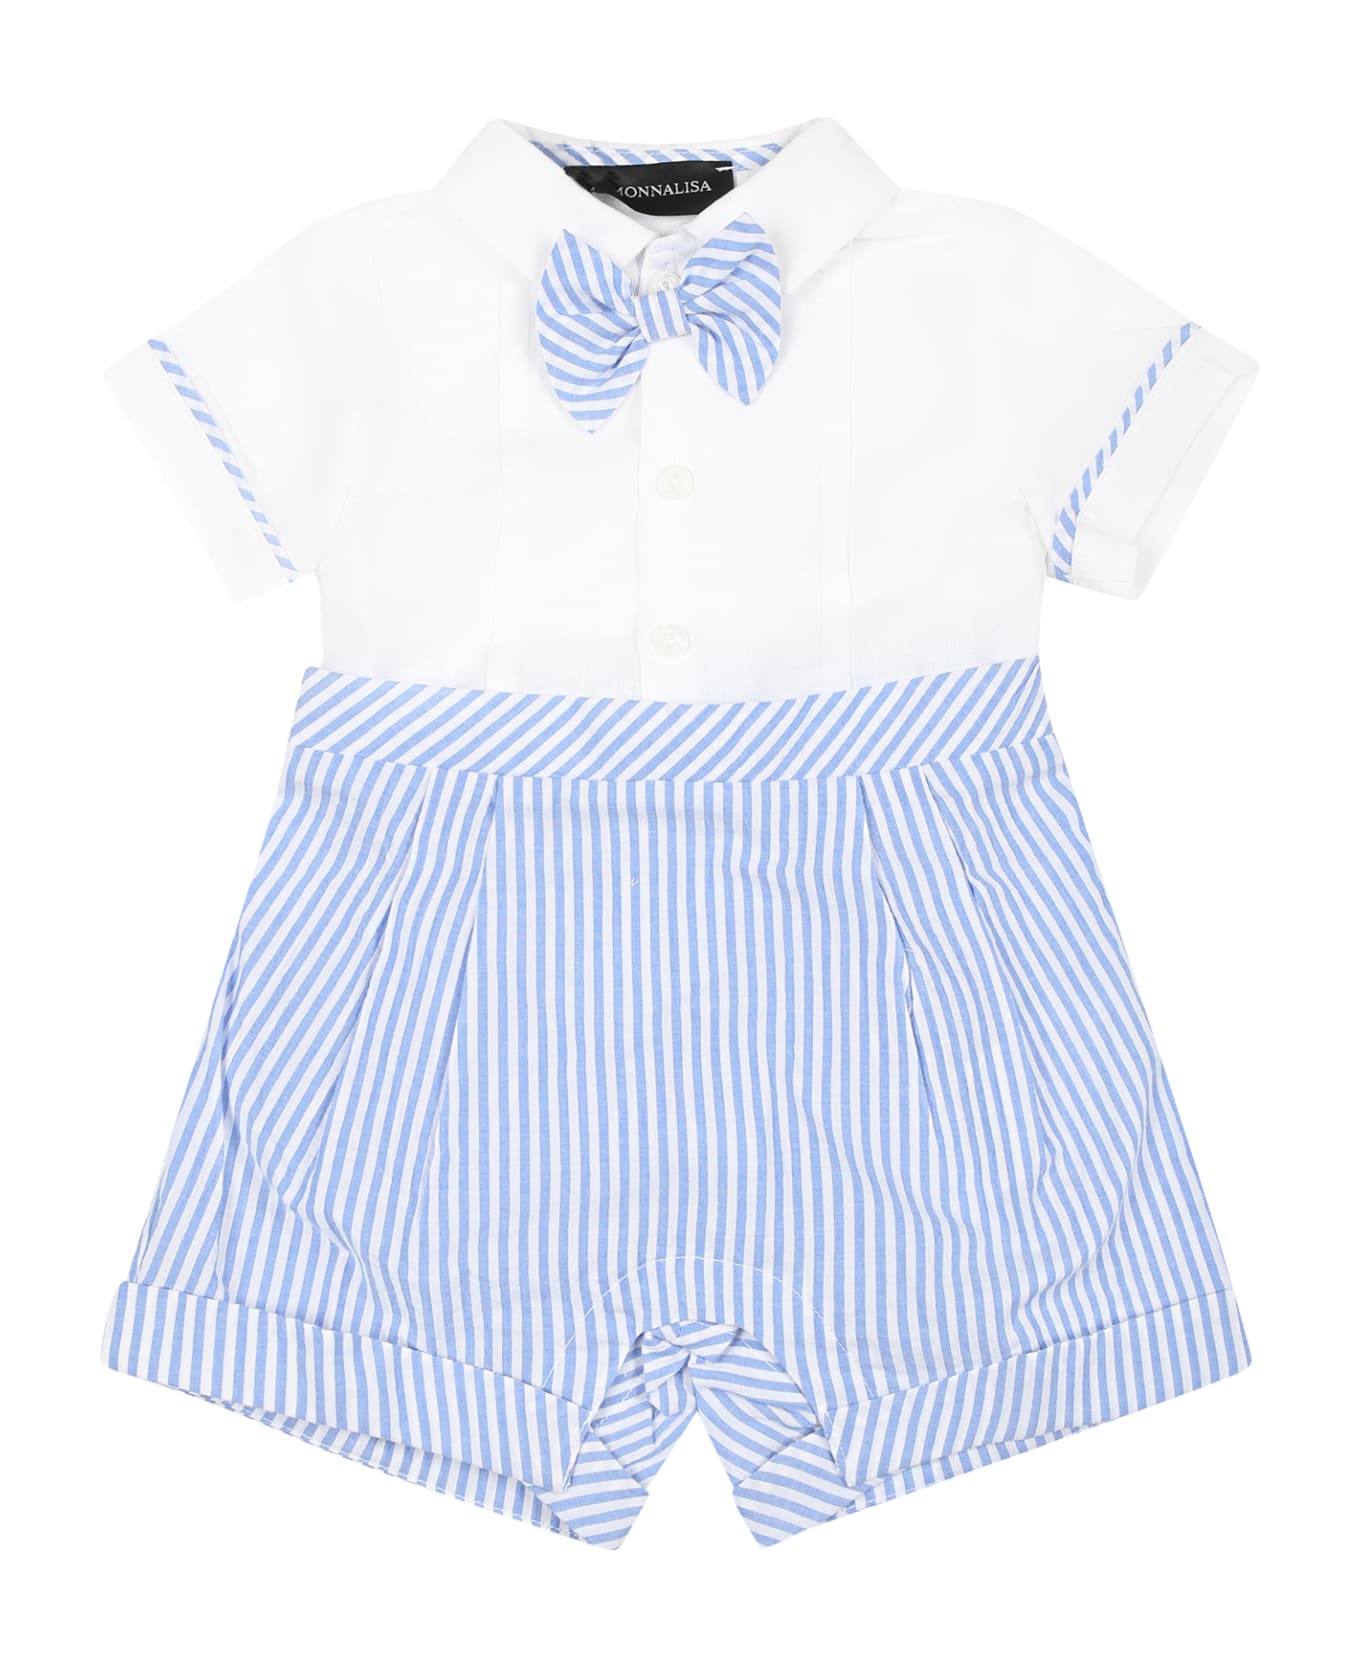 Monnalisa Light Blue Romper For Baby Boy With Bow Tie - White ボディスーツ＆セットアップ